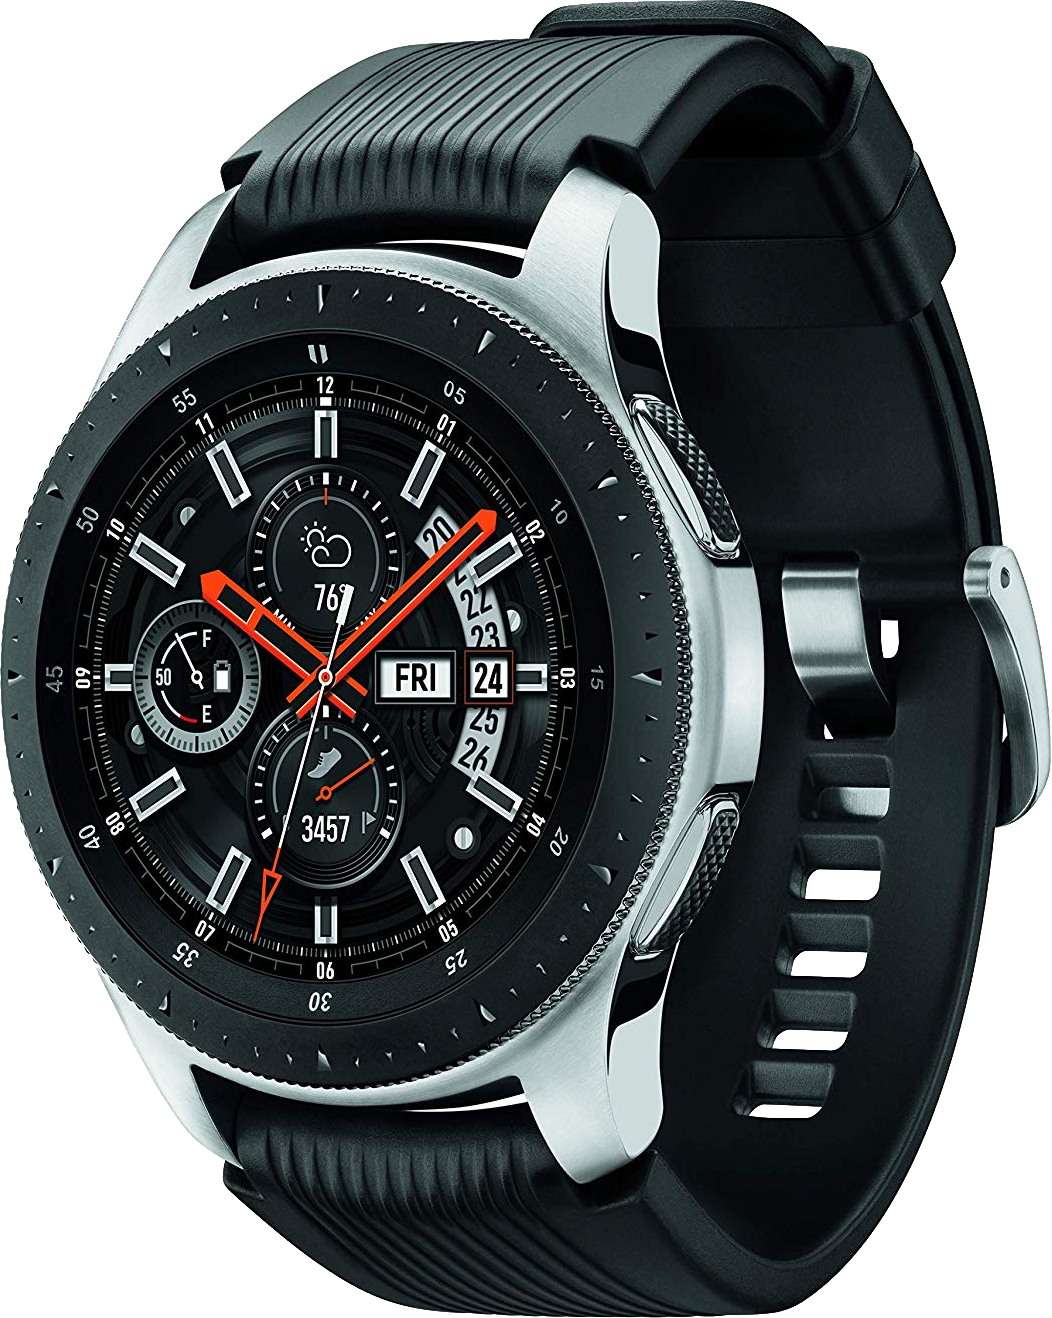 Feb 07, · Release Date for Gear S4.No official information has been received so far regarding the release date for the Samsung Gear S4.The S2 was released in August , the S3 in August however, the S4 wasn’t even mentioned at the IFA presentation in 